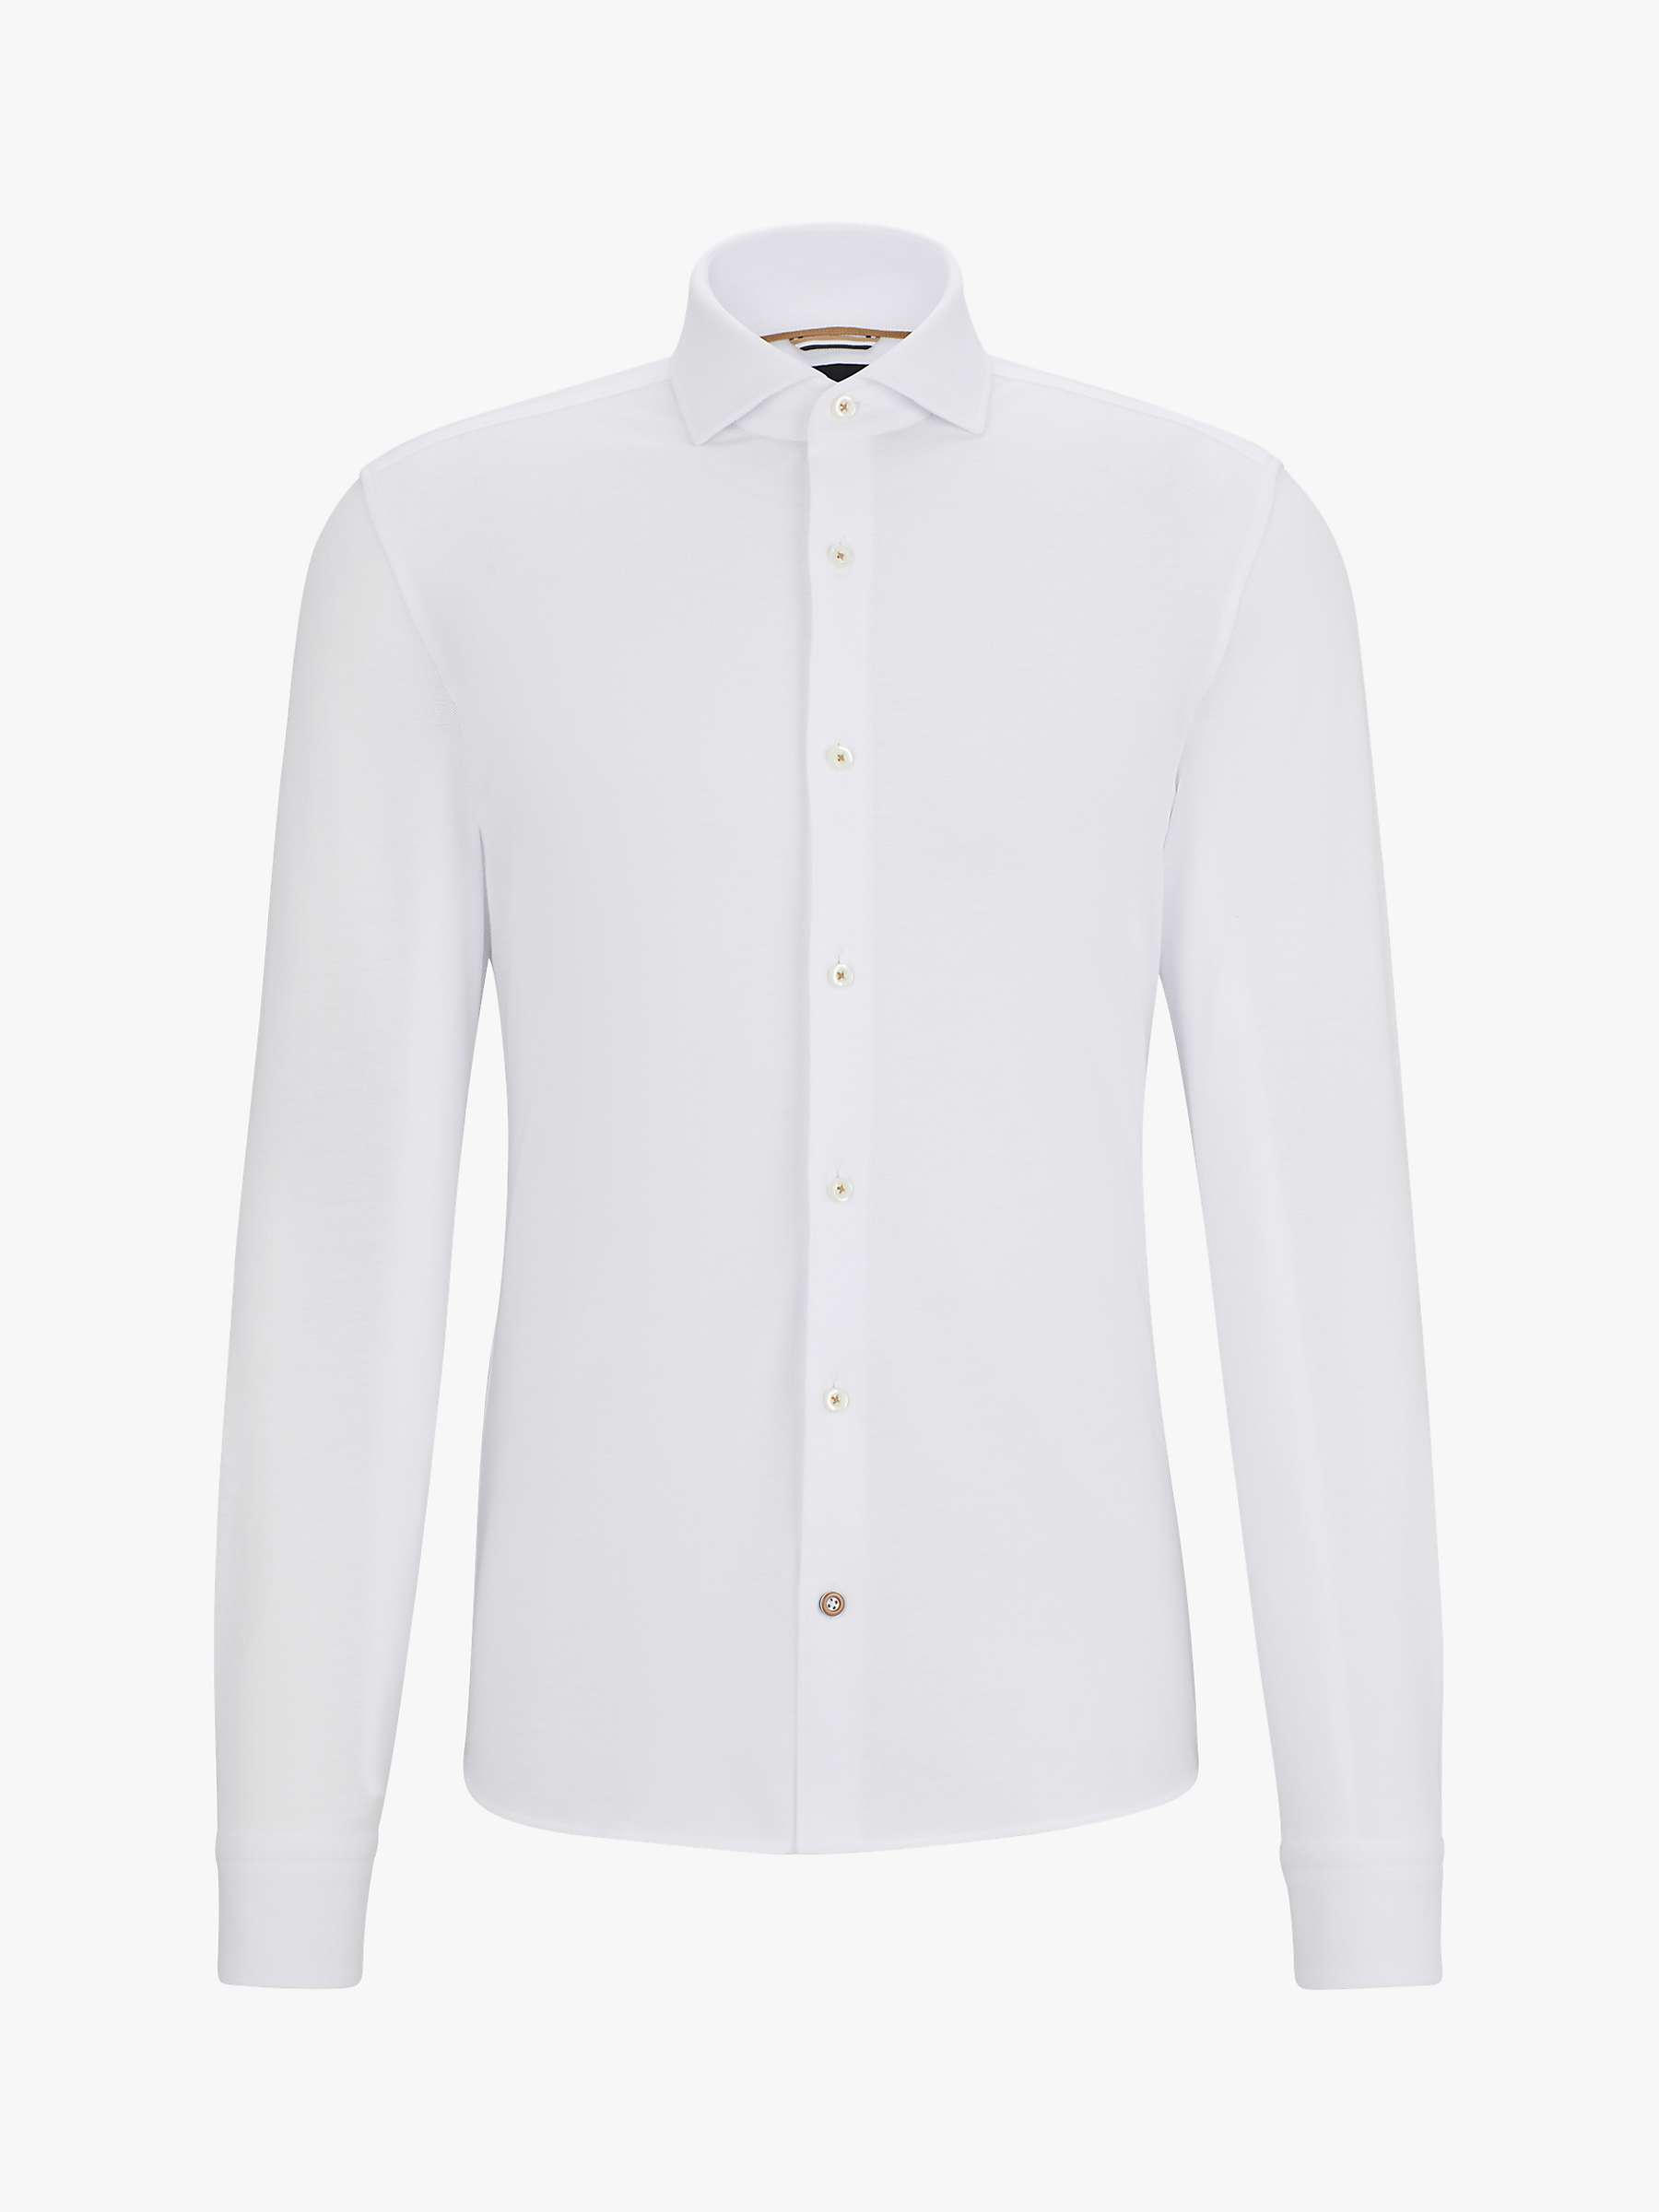 Buy BOSS Casual Fit Long Sleeve Shirt Online at johnlewis.com